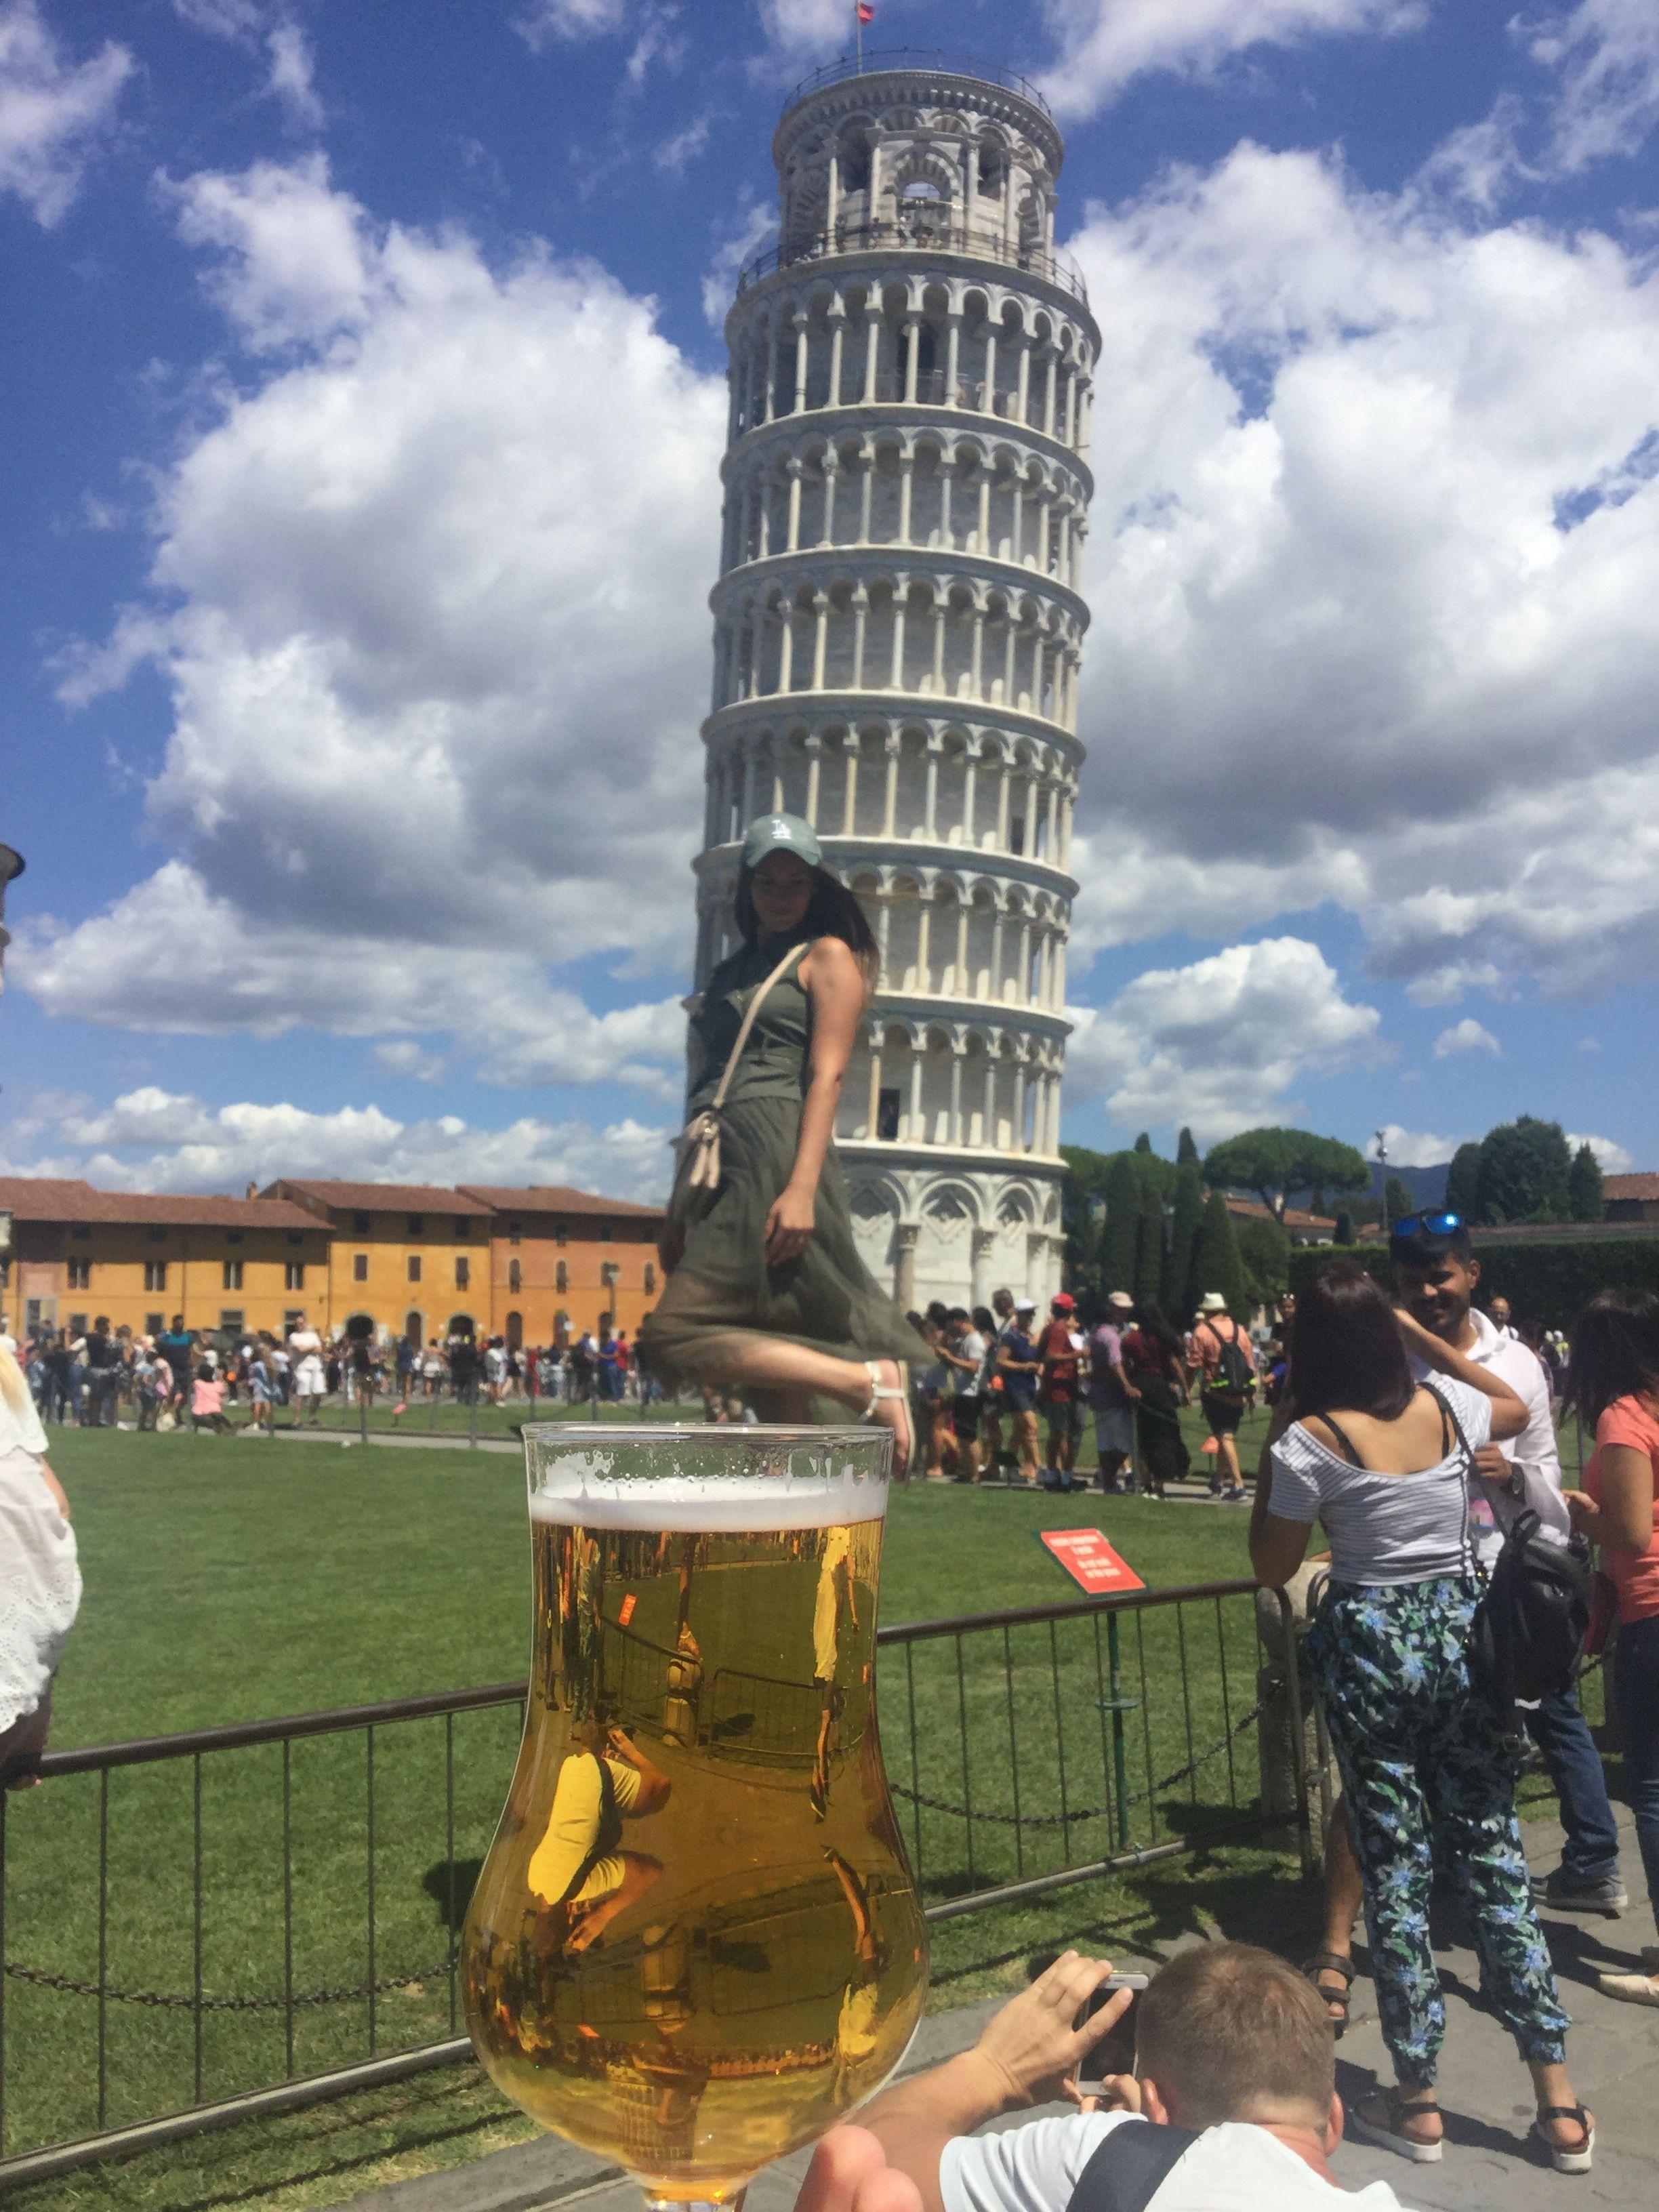 Visiting the famous Leaning Tower of Pisa at the Square of Miracles